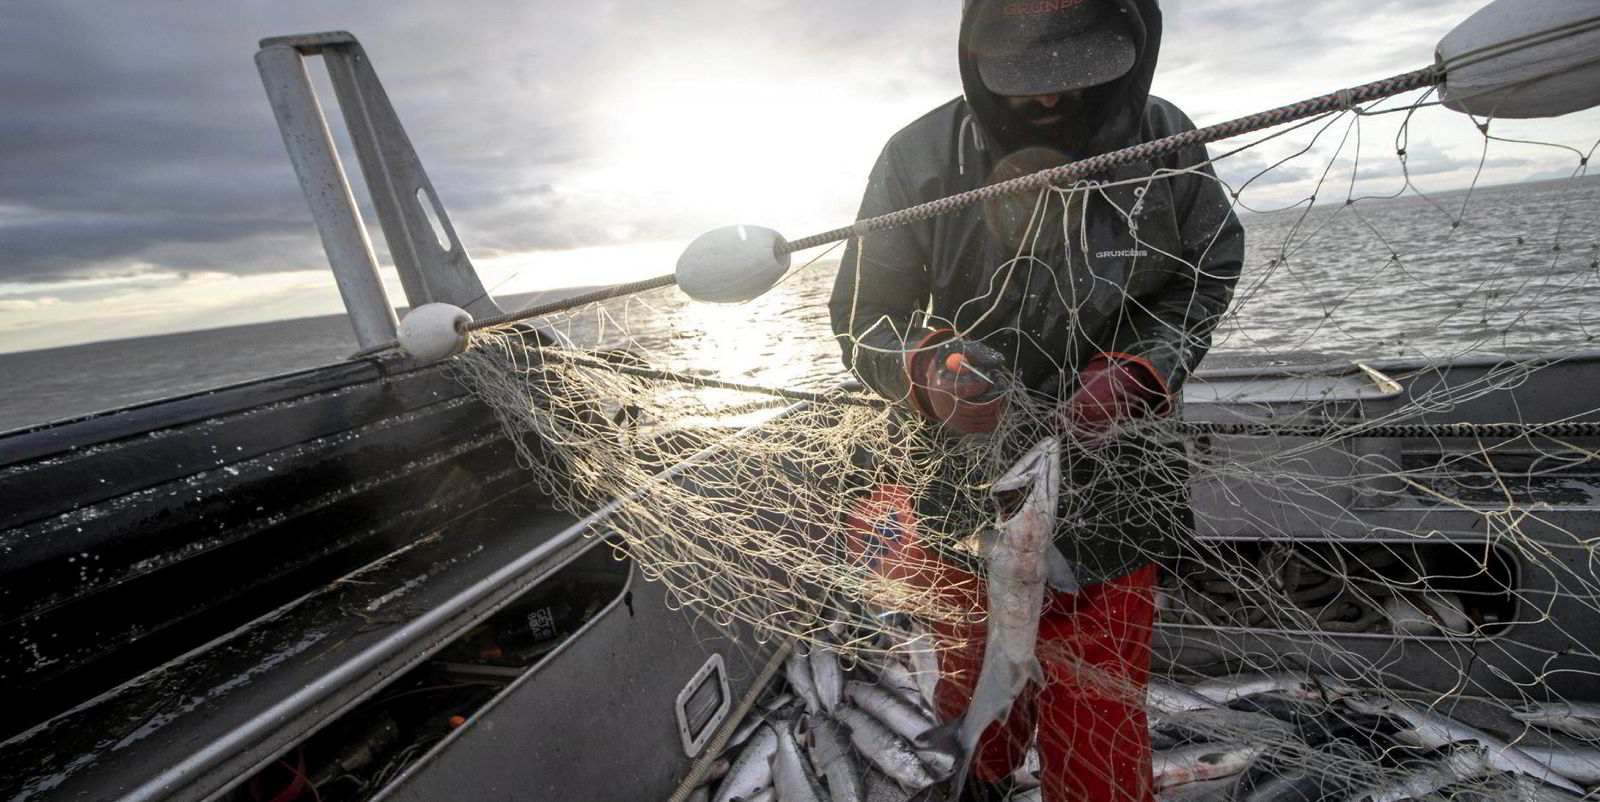 Shades of Silver Bay? Bristol Bay salmon fishermen may forge their own path  after $130 million loss